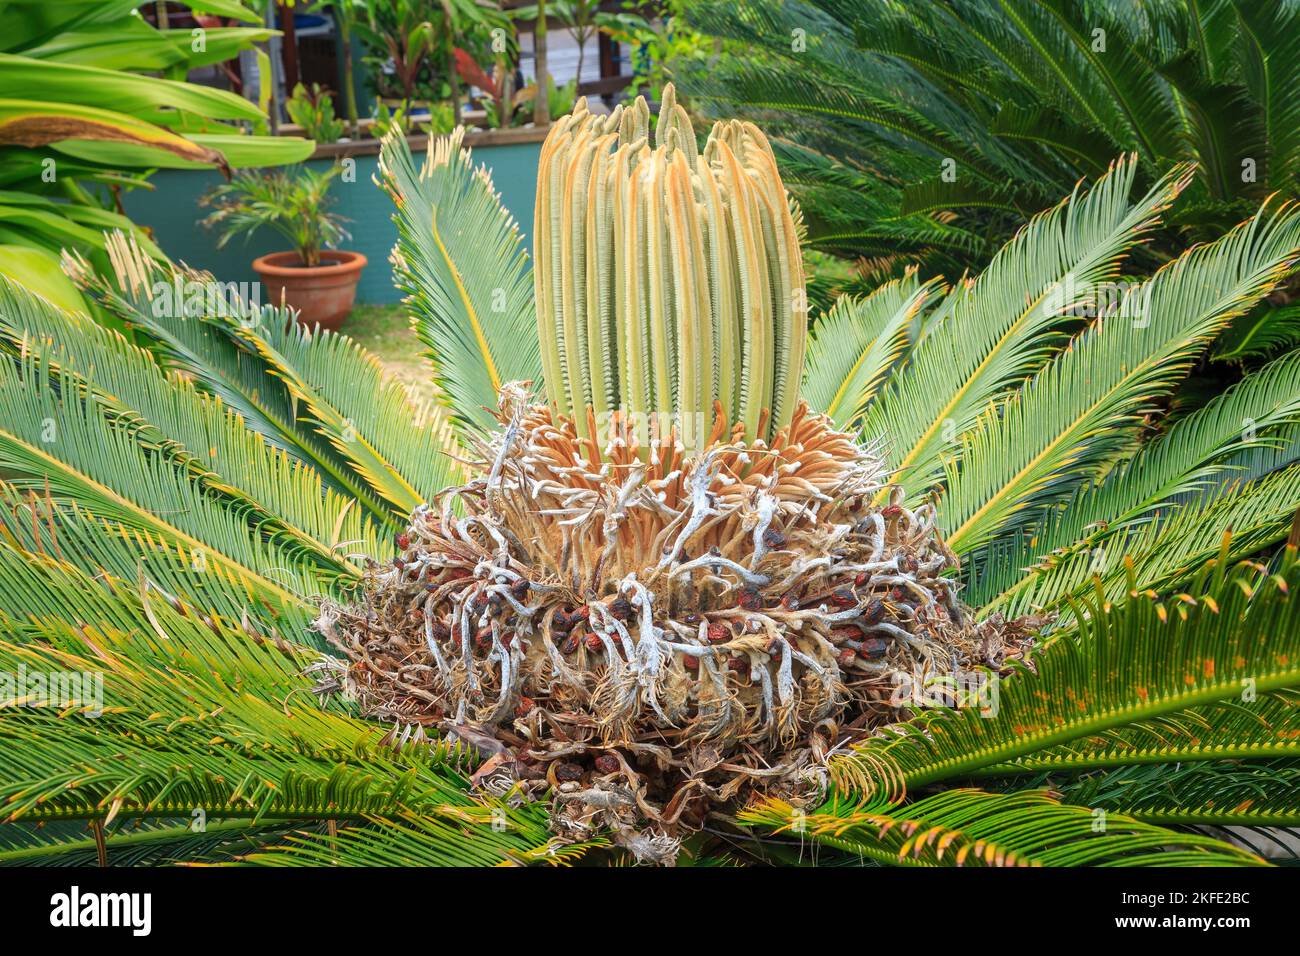 Fresh new leaves emerging from the crown of Cycas revoluta, a cycad (a member of an ancient group of palm-like plants) Stock Photo